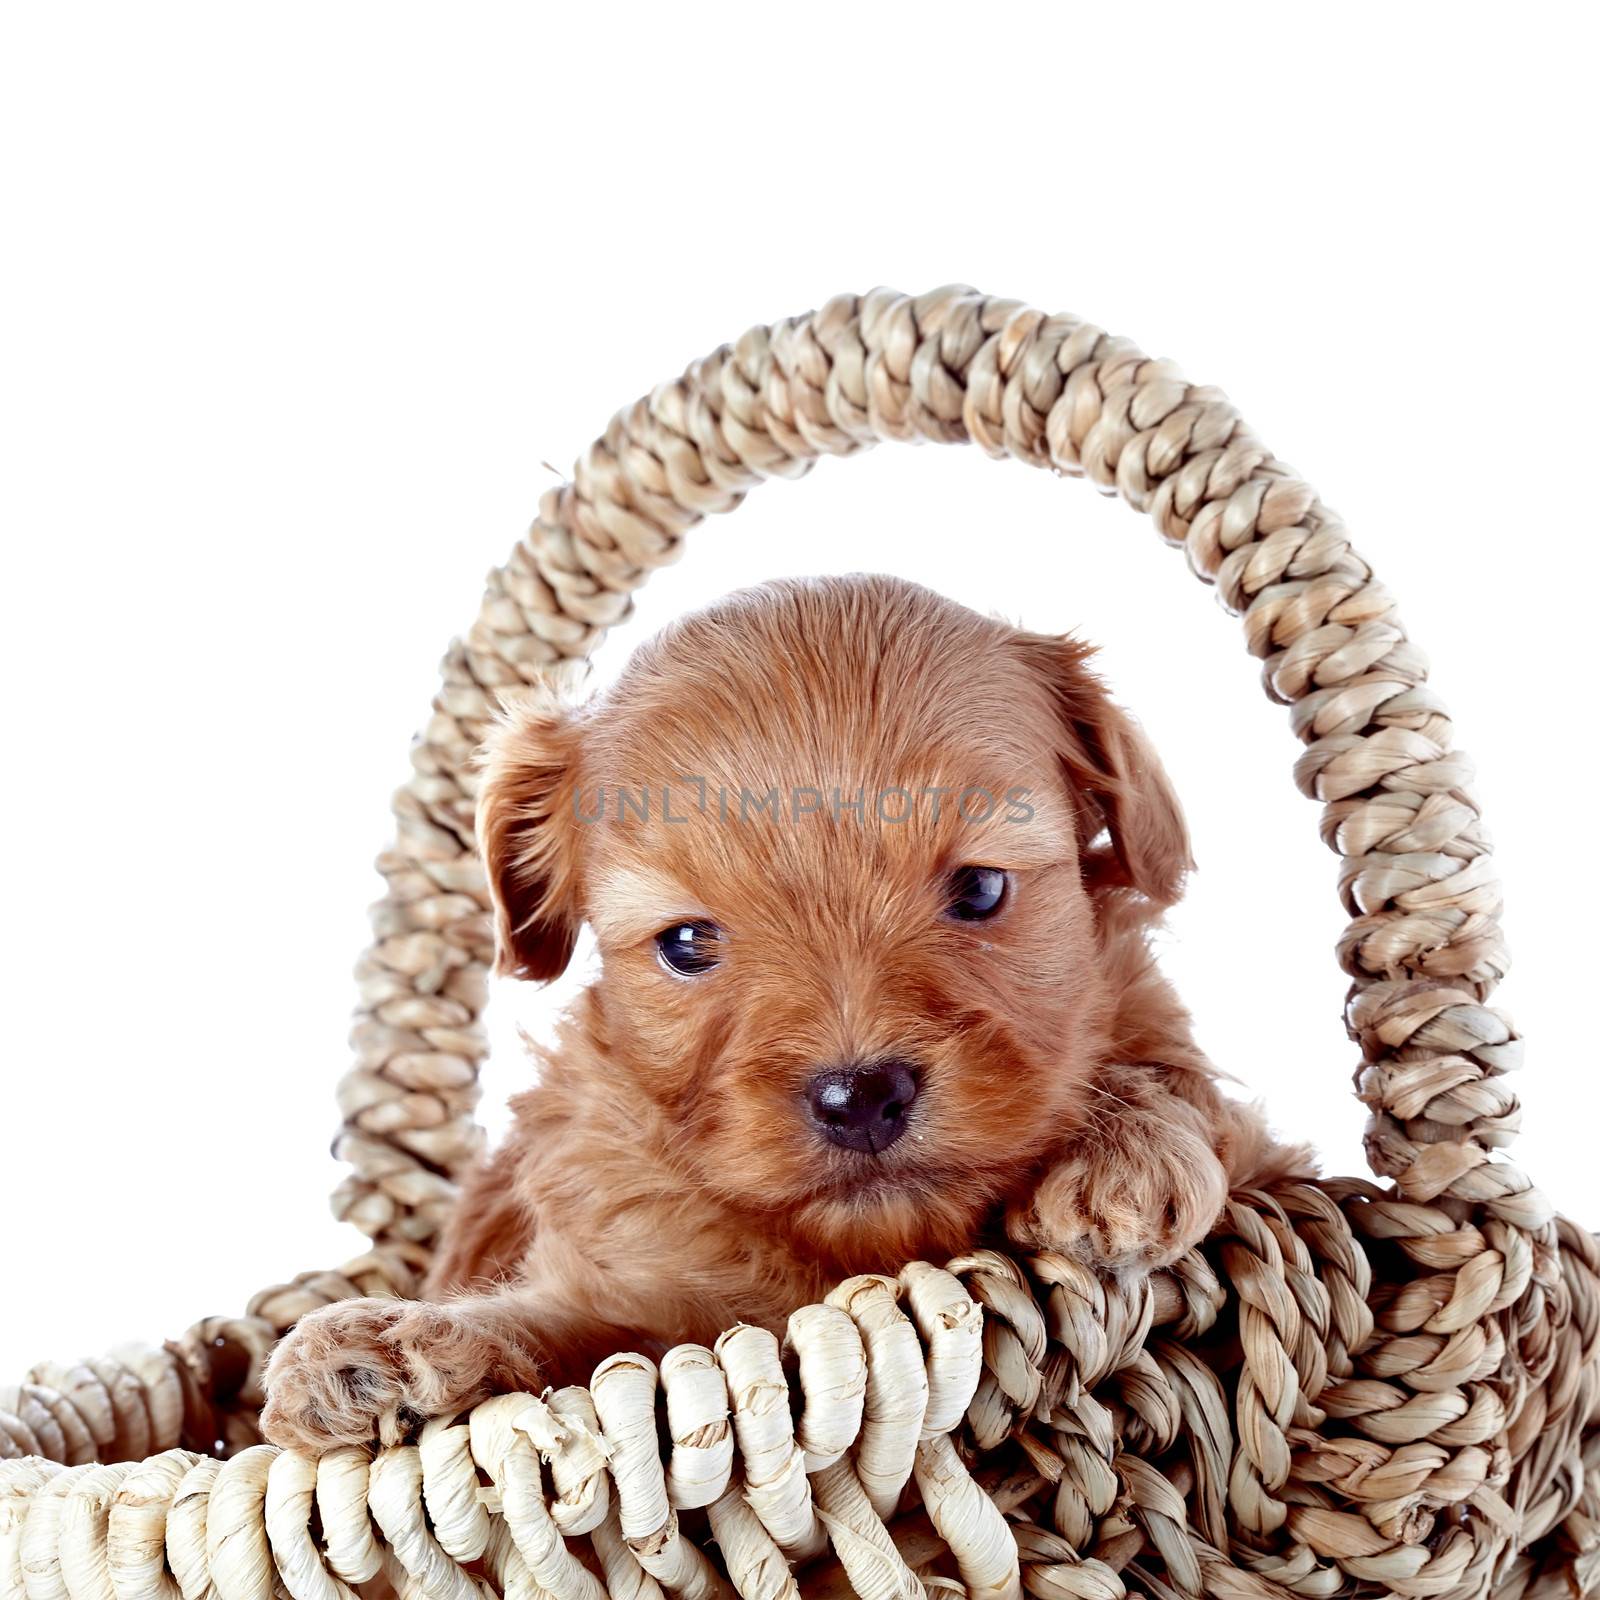 Portrait of a puppy in a wattled basket. Puppy in a wattled basket. Puppy of a decorative doggie. Decorative dog. Puppy of the Petersburg orchid on a white background